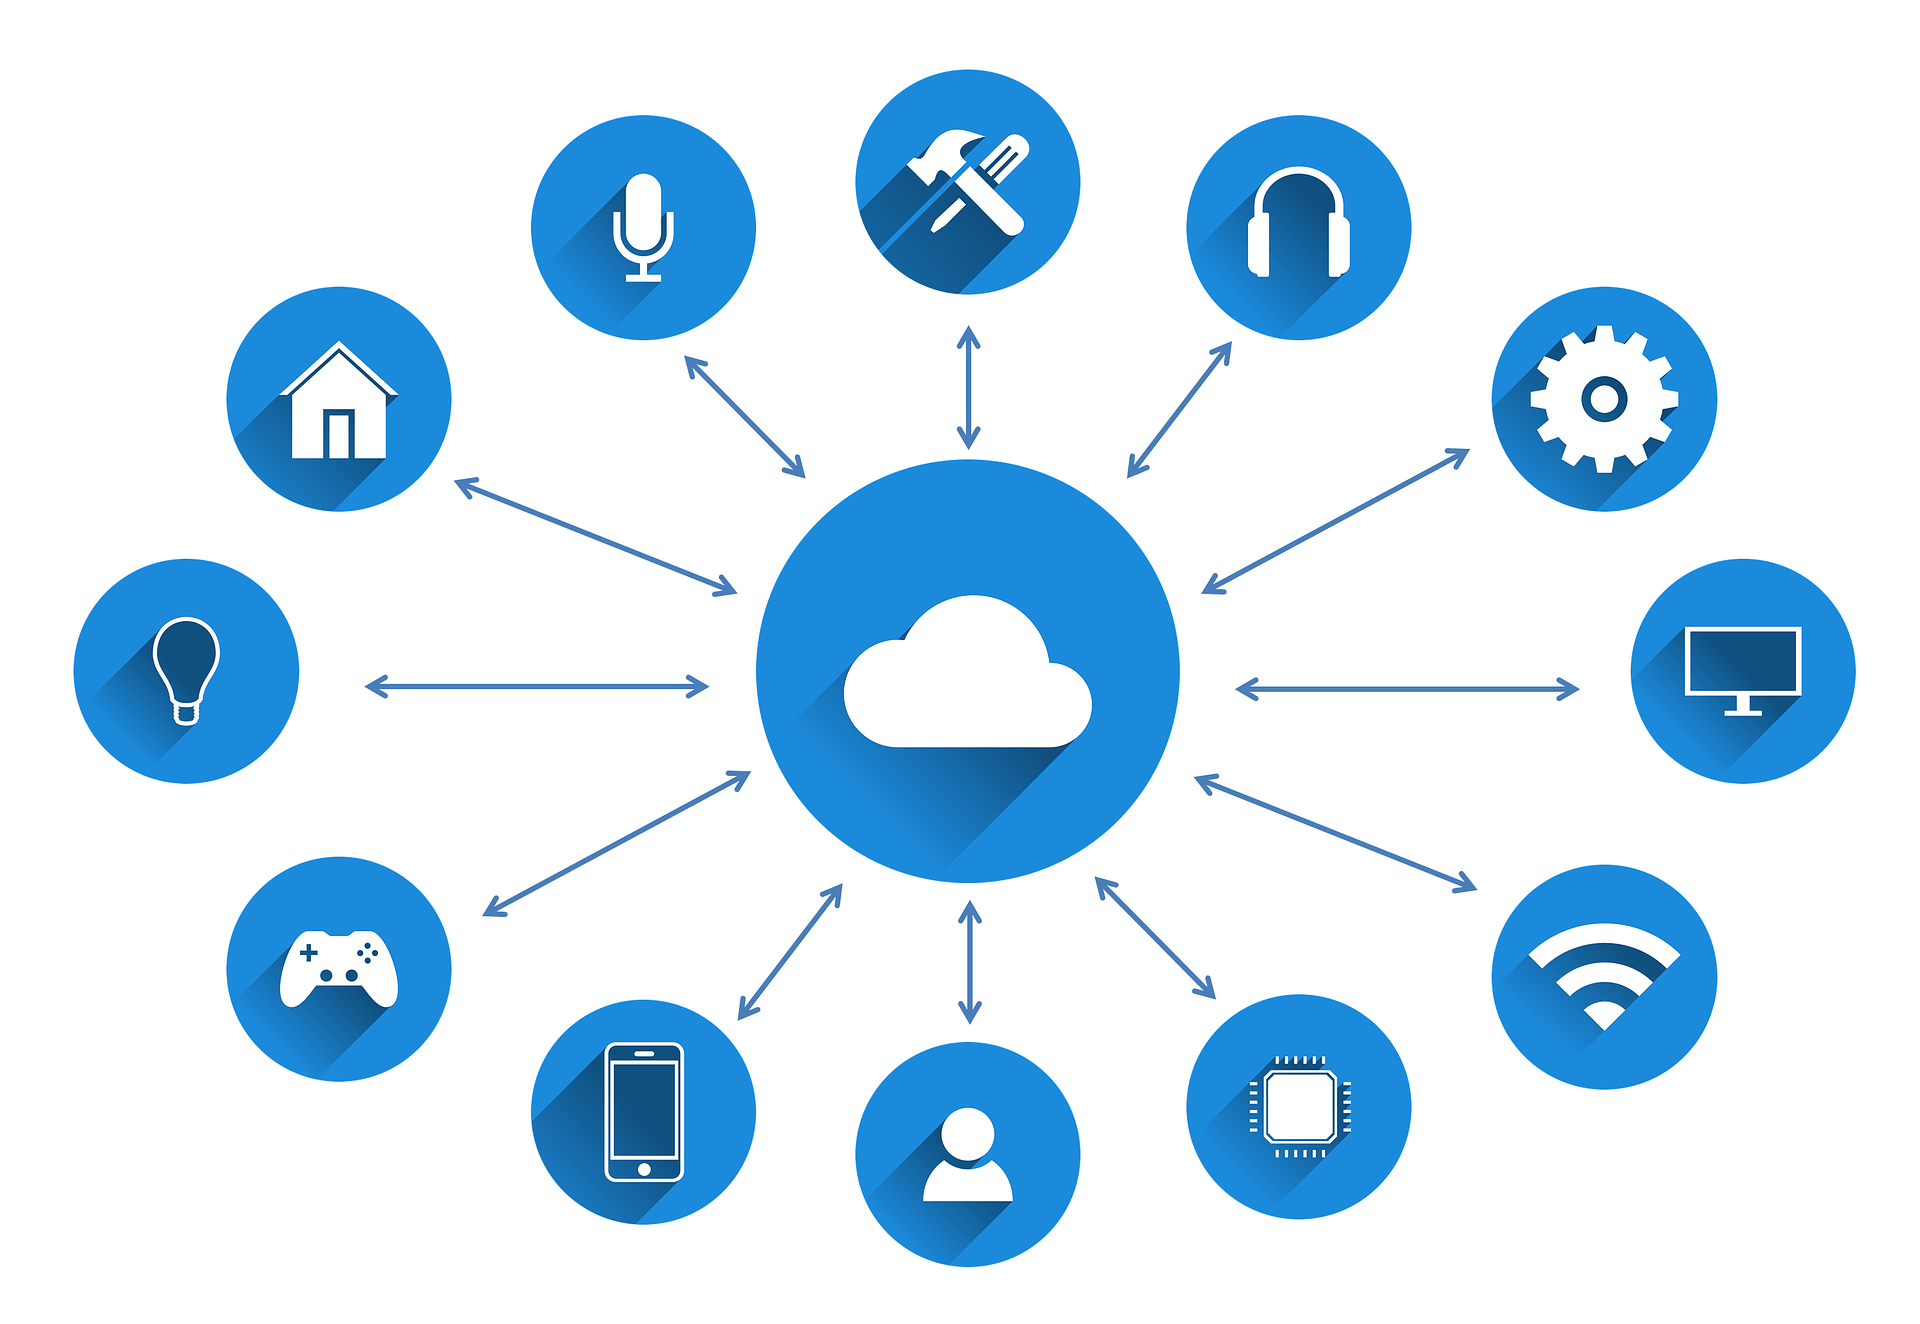 Graphic representation of Drupal's integration with Internet of Things technology in a smart home scenario.